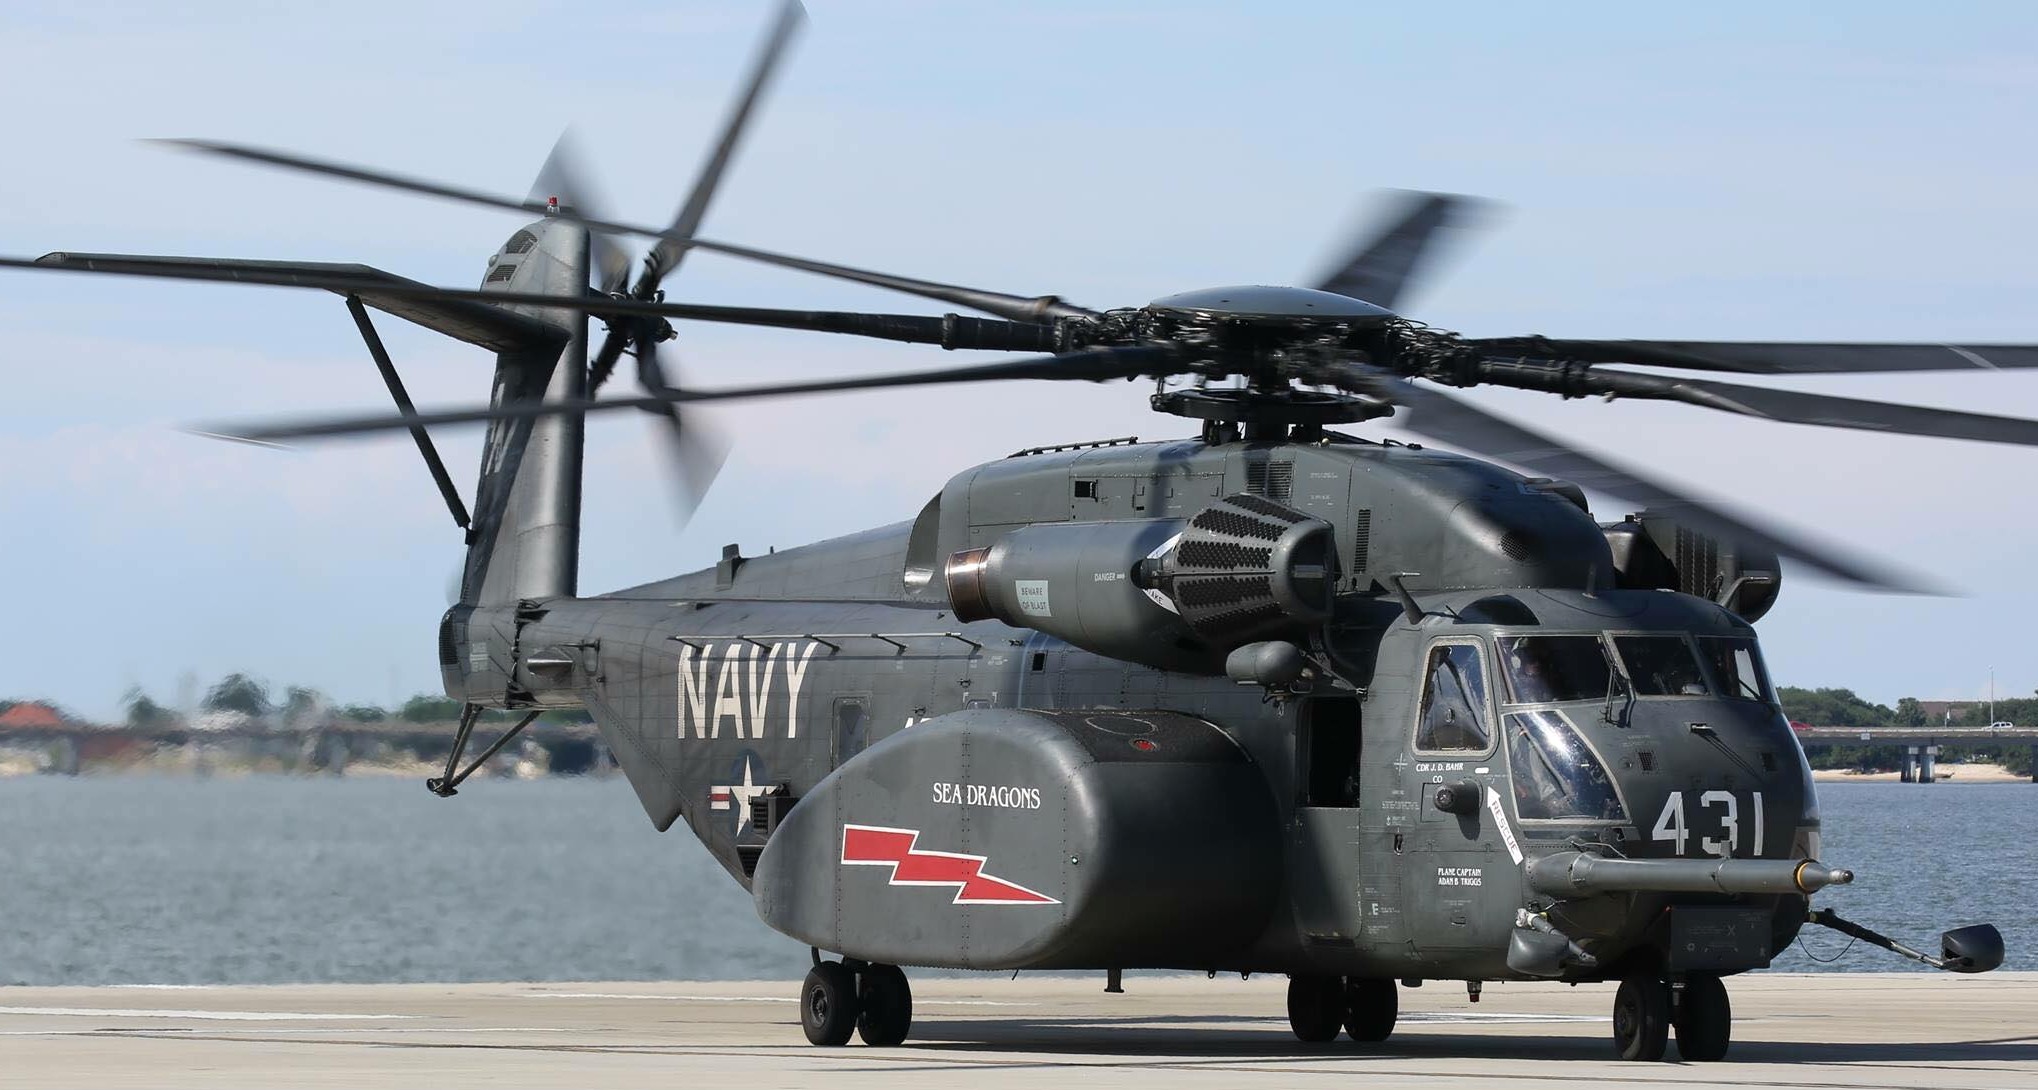 hm-12 sea dragons helicopter mine countermeasures squadron navy mh-53d norfolk virginia 08x